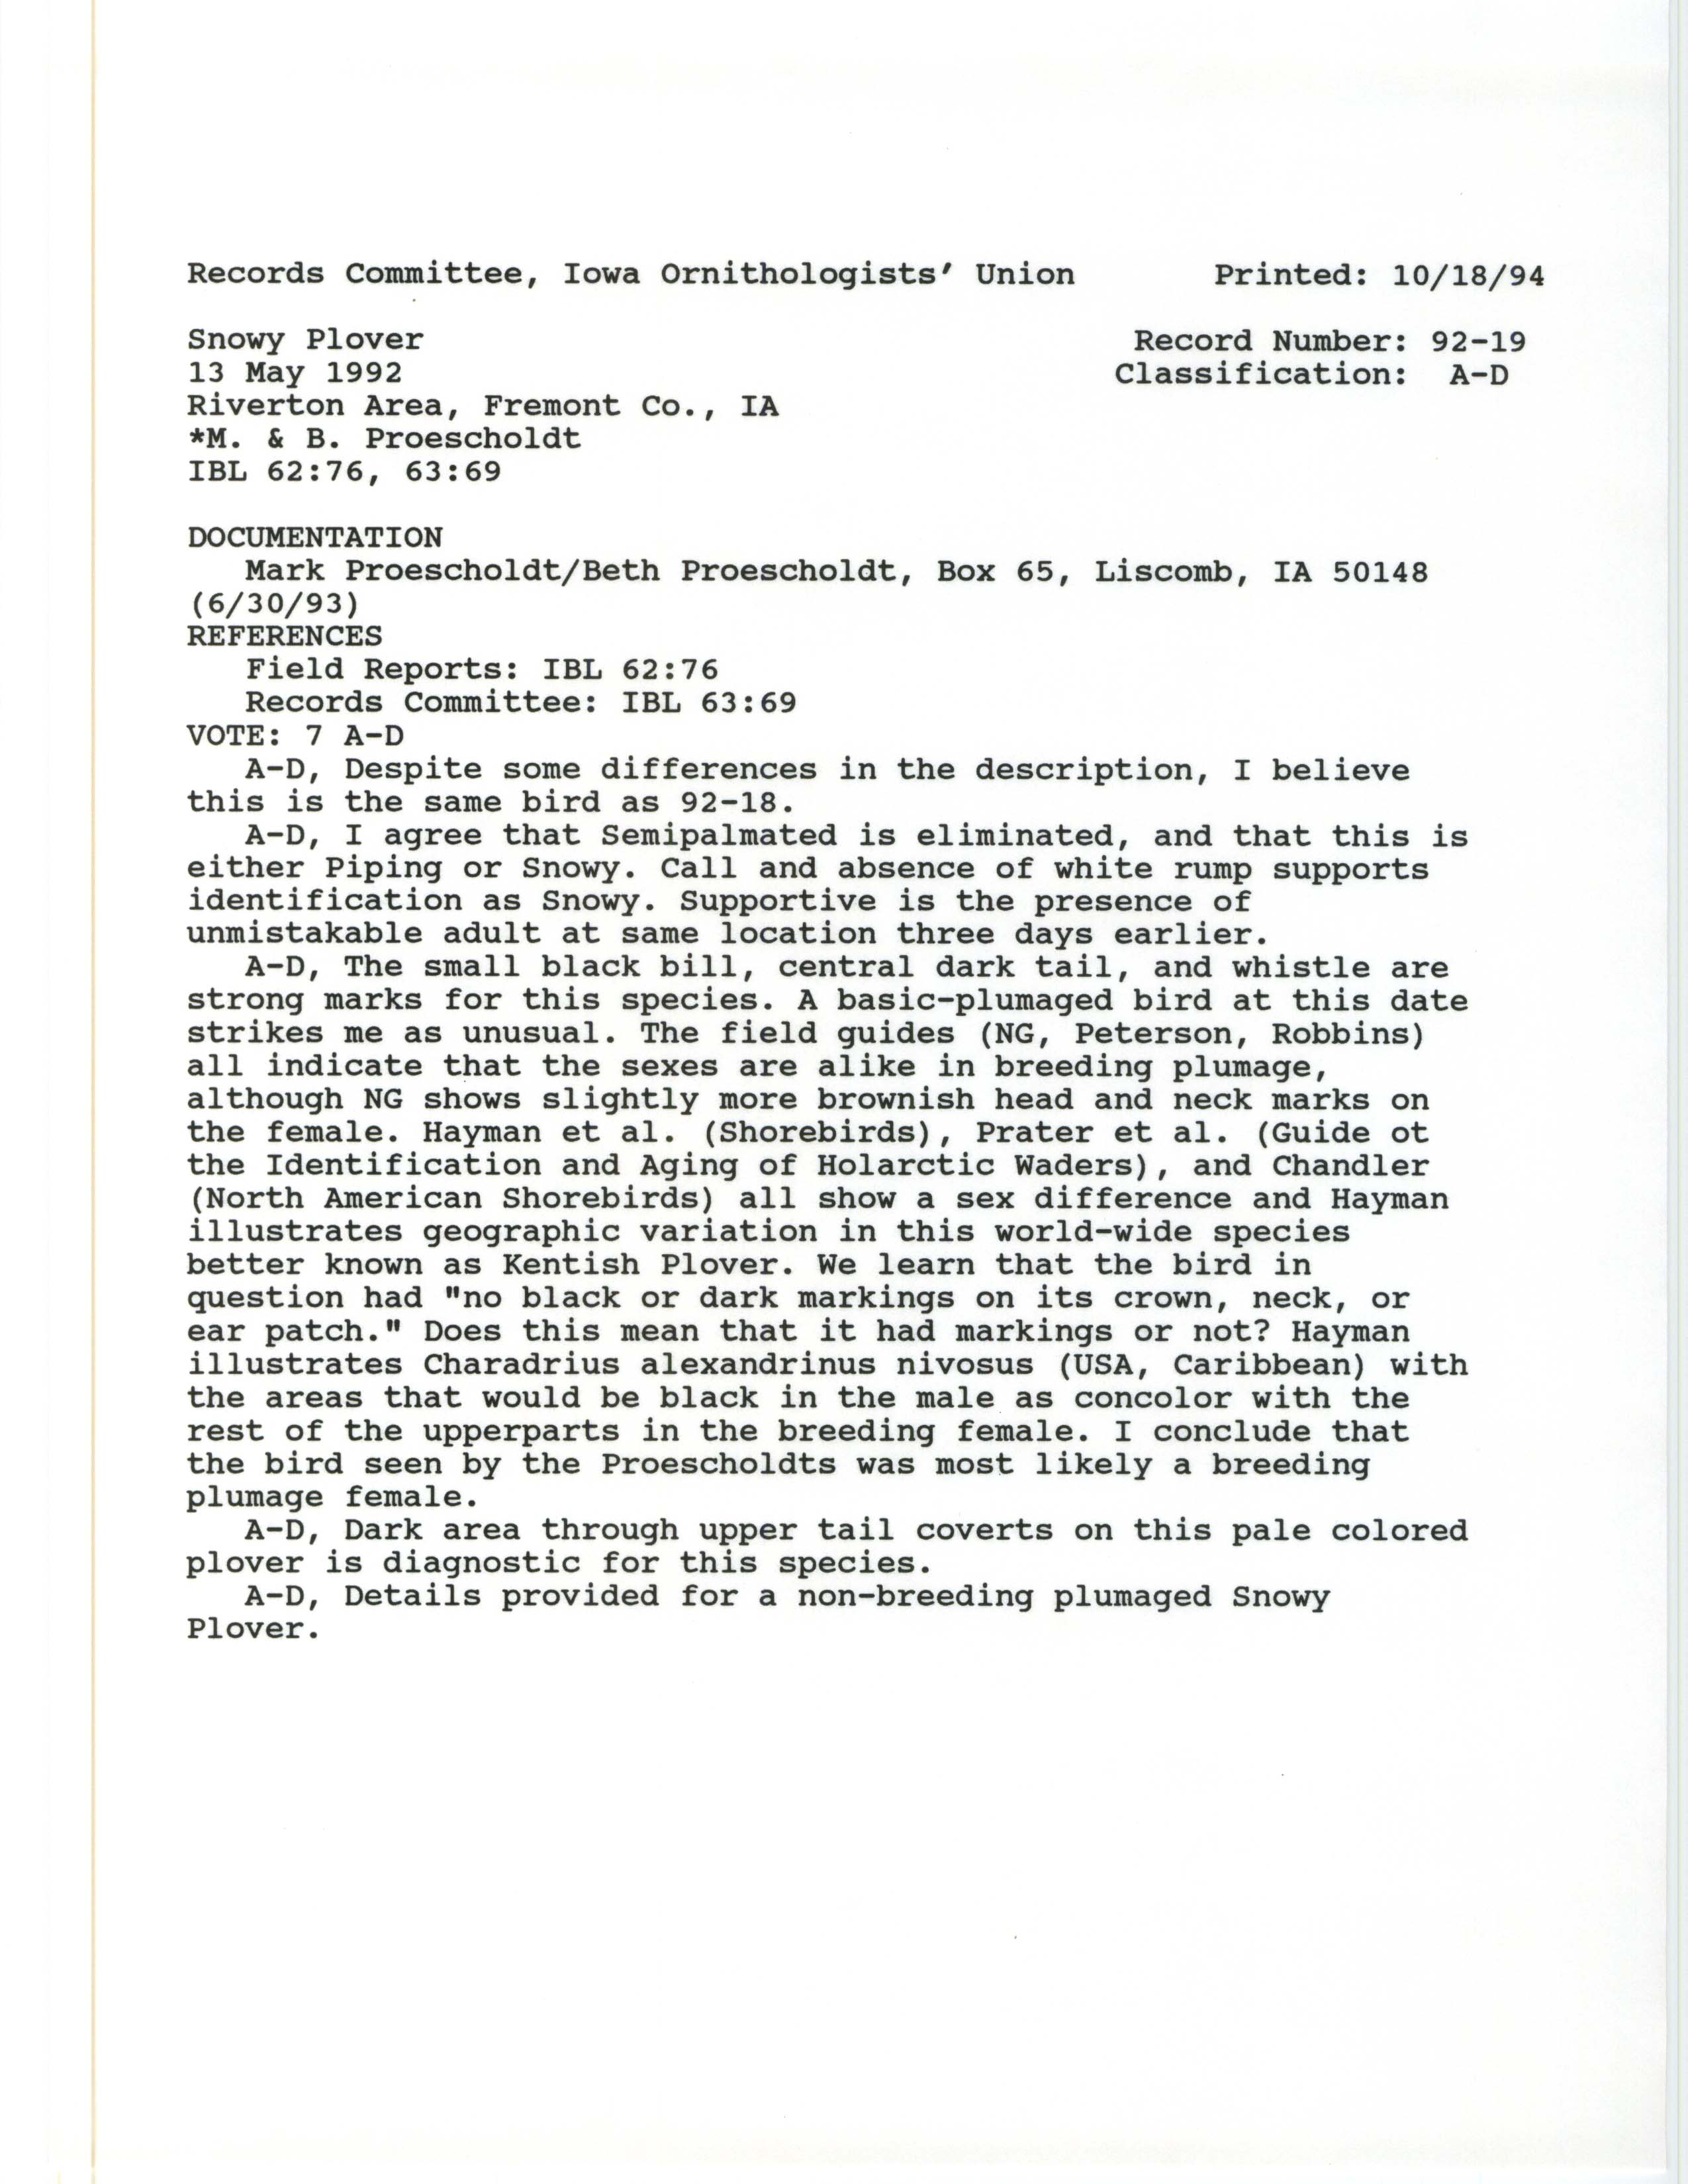 Records Committee review for rare bird sighting of Snowy Plover at Riverton Wildlife Area, 1992